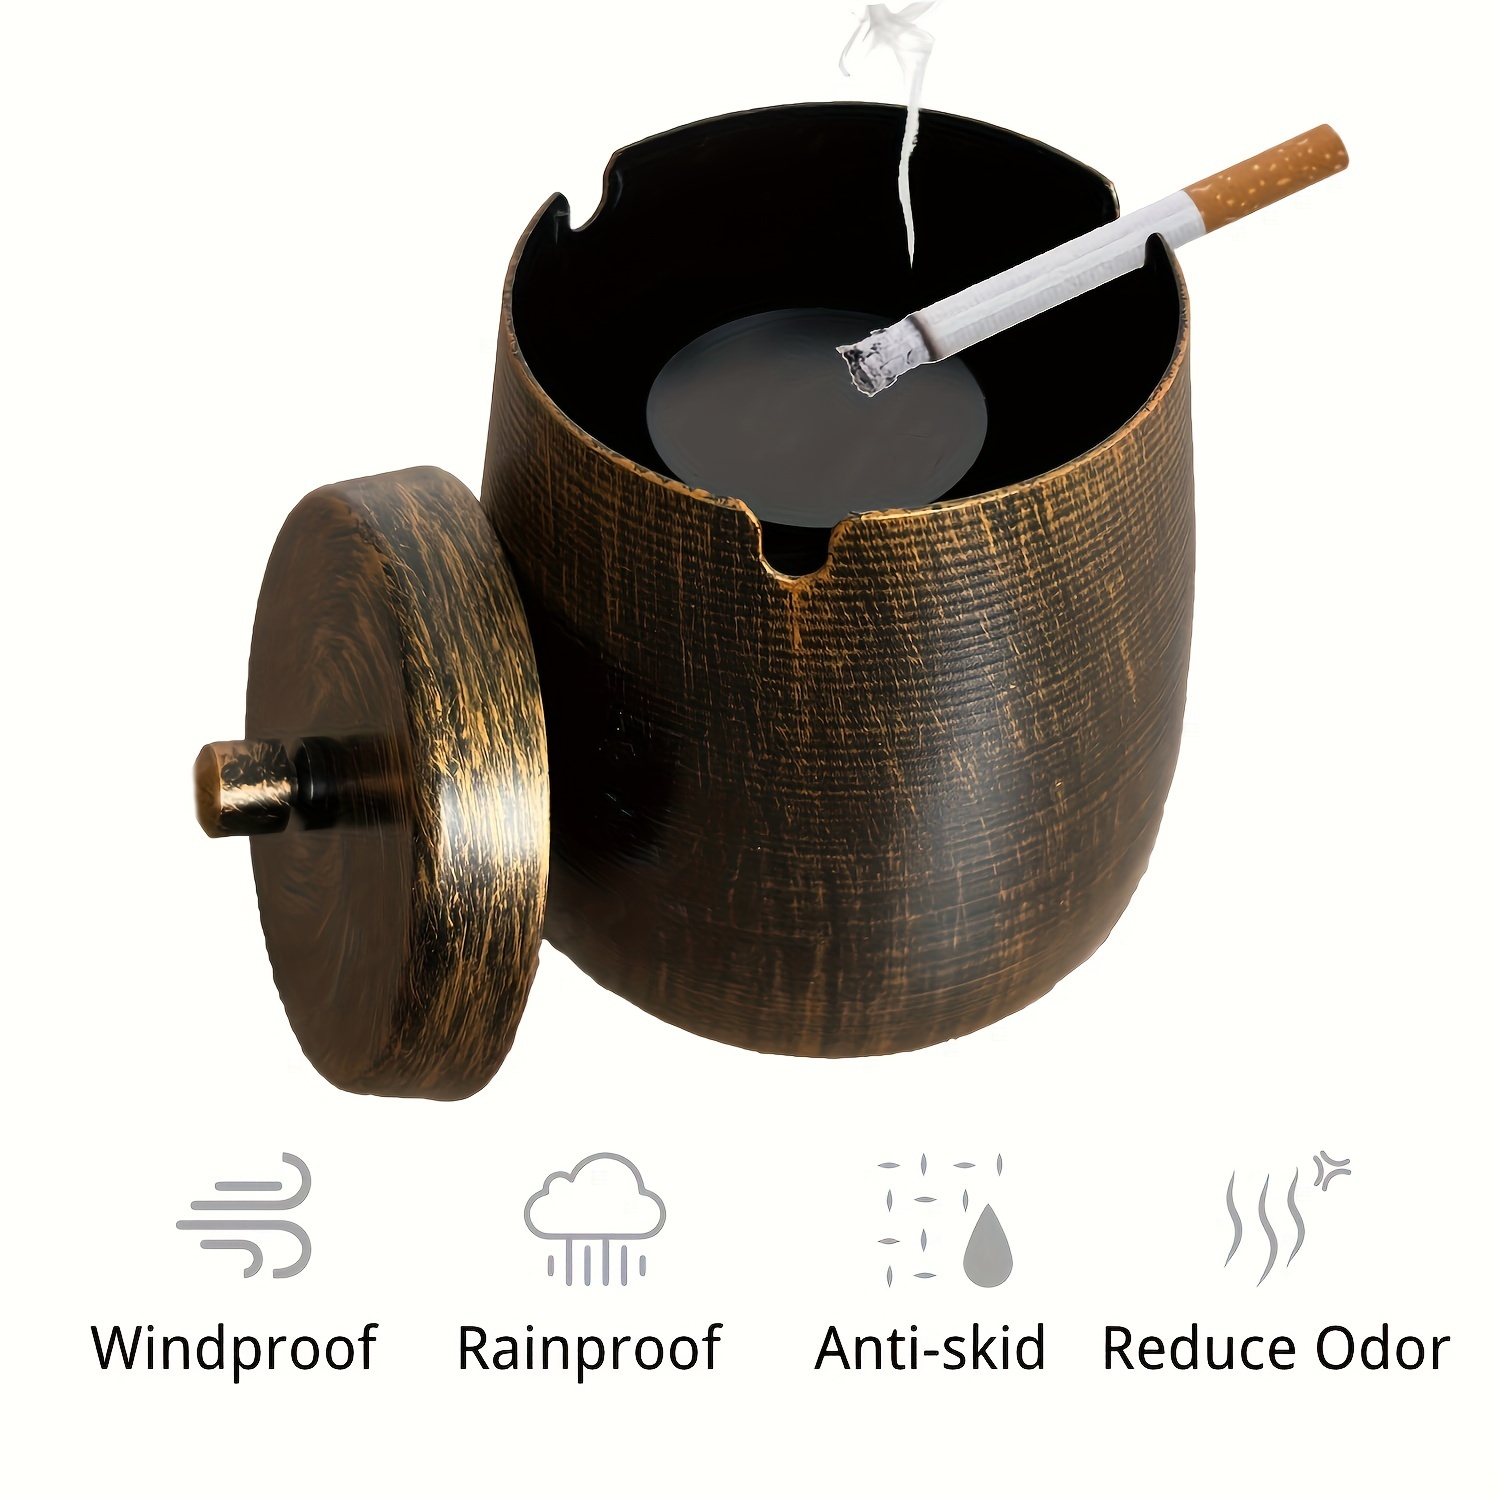 Outdoor Ashtray with Lid for Cigarettes Stainless Steel Windproof Rainproof